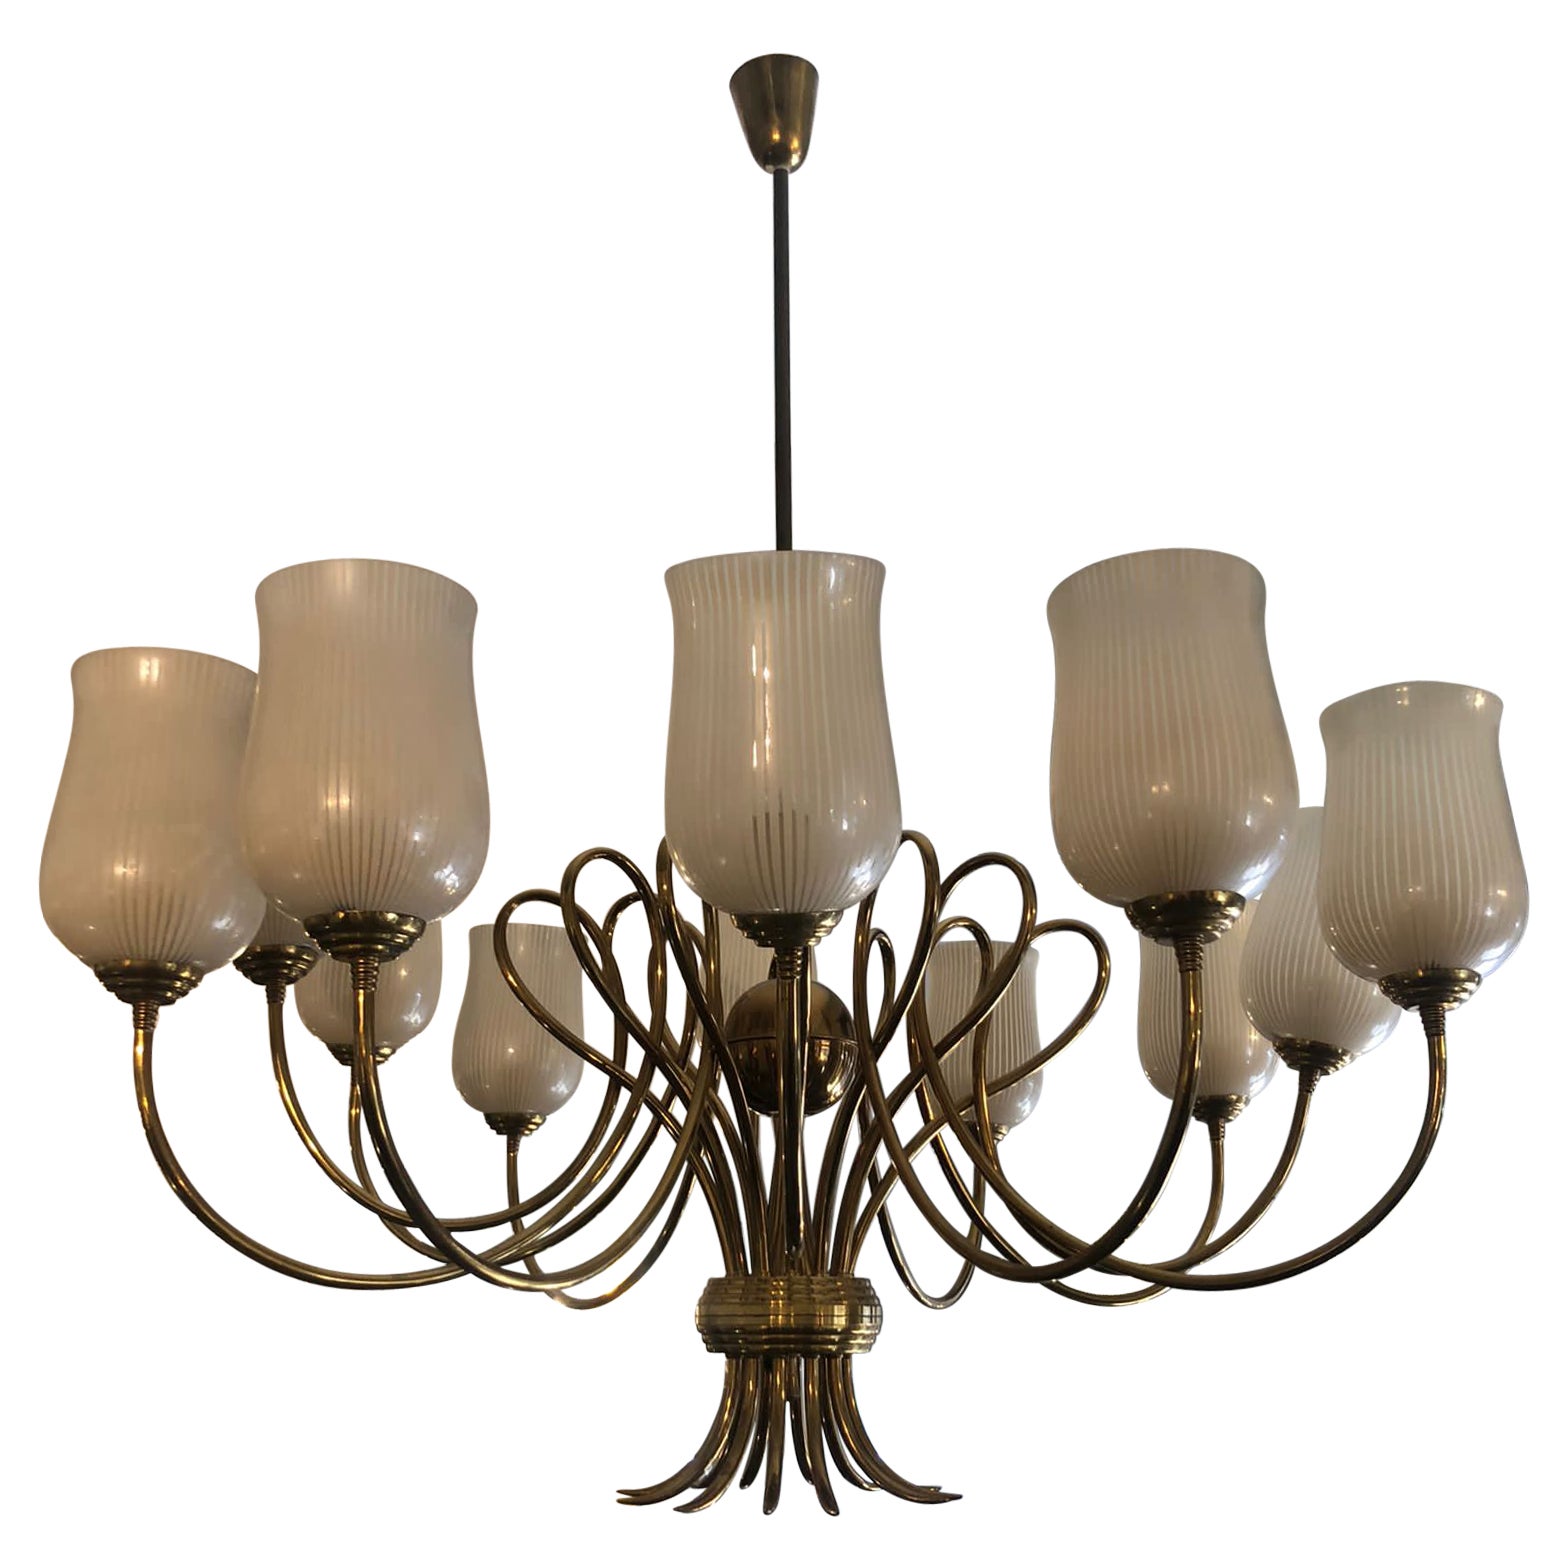 Venini 1940s Brass Arms and Blown Glass Lampshades Chandelier, Attributed